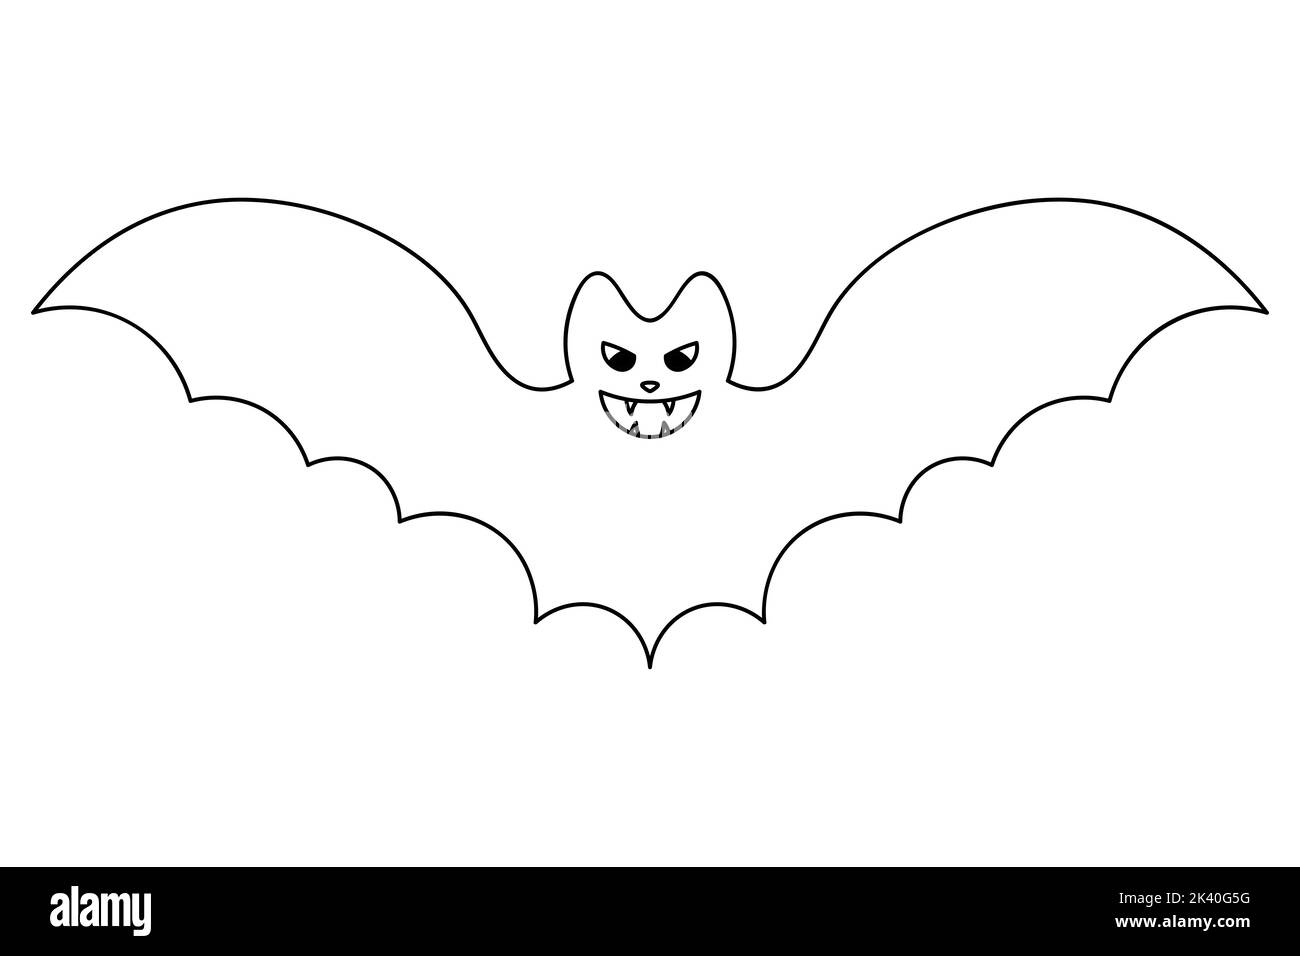 Bat. Vector illustration. Outline on an isolated white background. Doodle style. Coloring book for children. Sketch. Halloween symbol. Vampire animal. Stock Vector